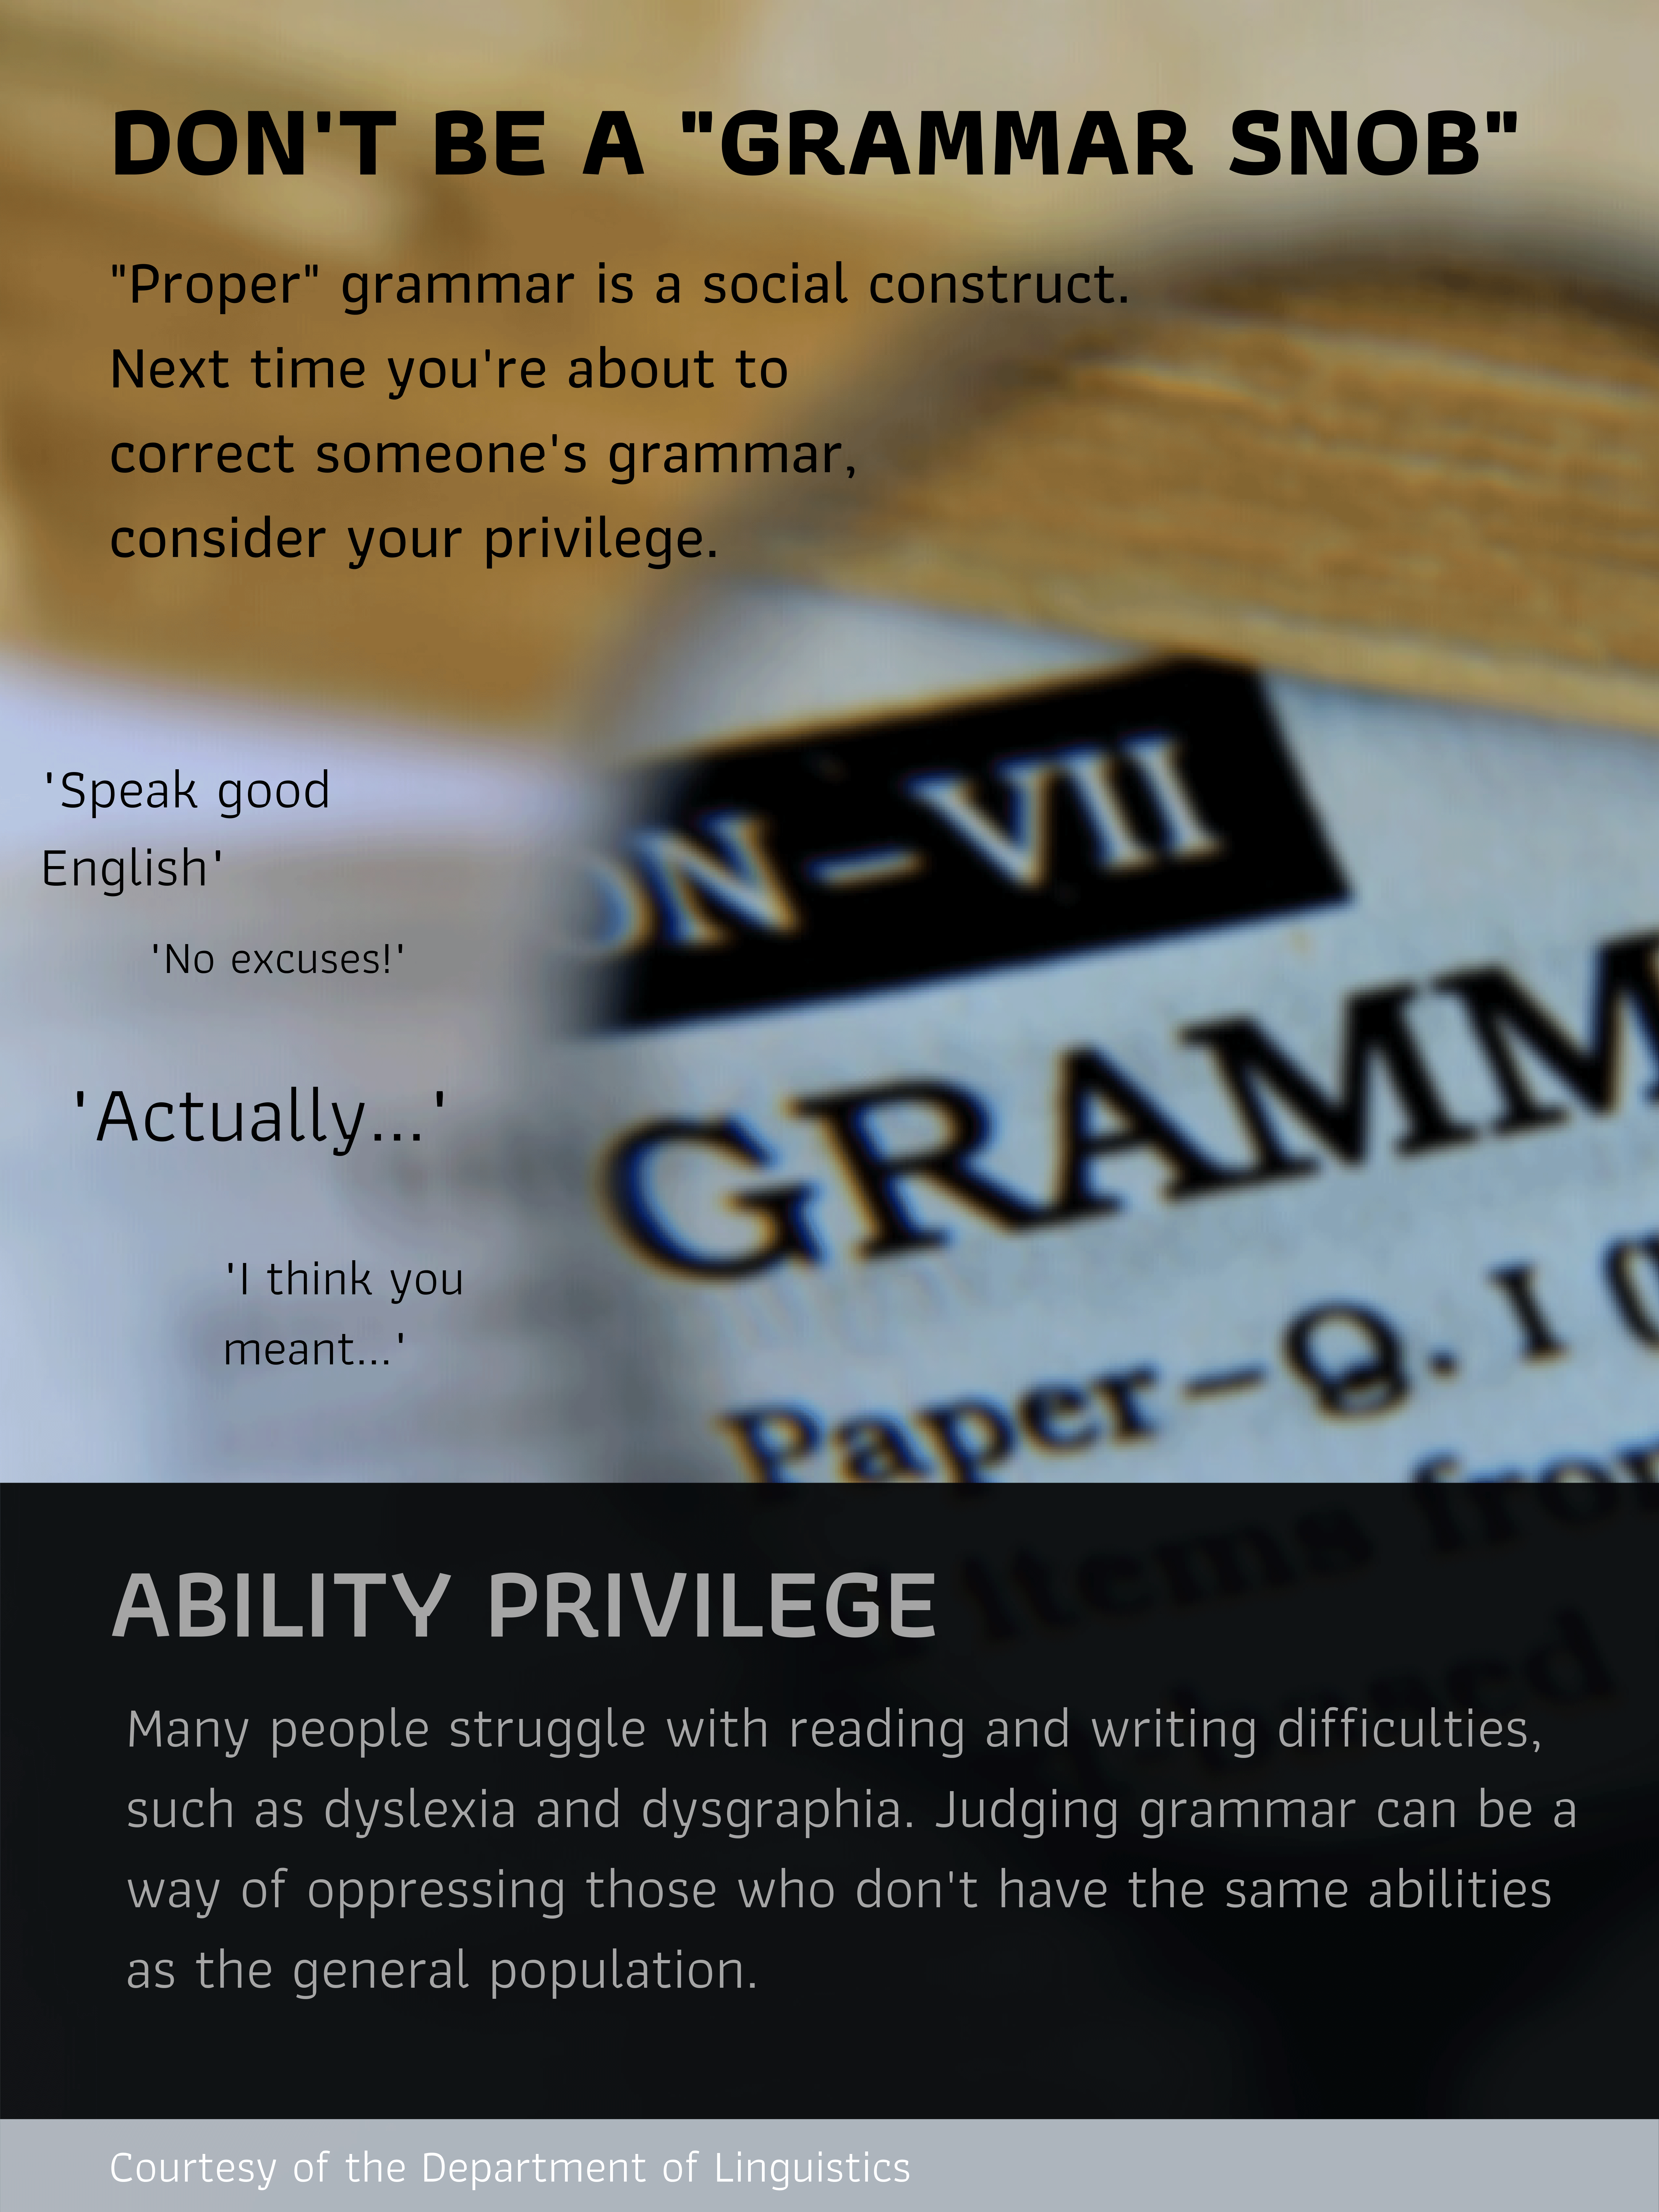 Linguistics Poster. Don't be a "grammar snob." Consider your ability privilege. See page for full details.